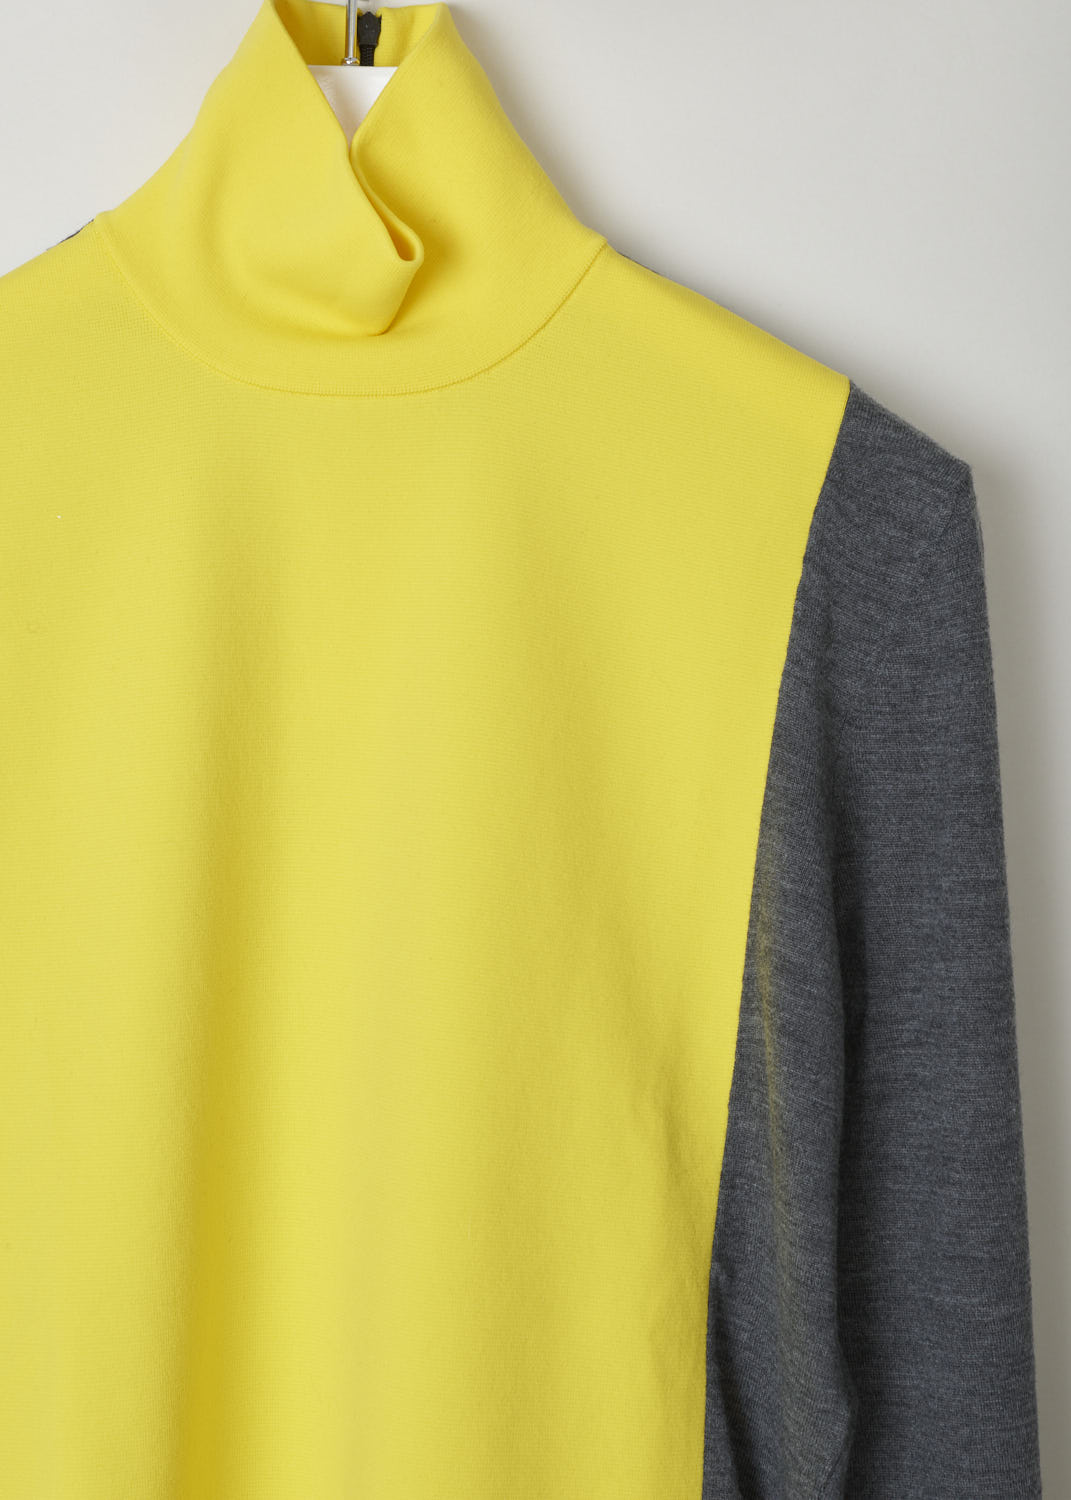 PLAN C, TWO-TONE TURTLENECK SWEATER, DVCMC51KG0_FW003_Z3050, Yellow, Grey, Detail, Beautiful two-toned turtleneck. The long sleeves and back are grey and the front and neck are bright yellow. In the back of the neck, a concealed zipper can be found.